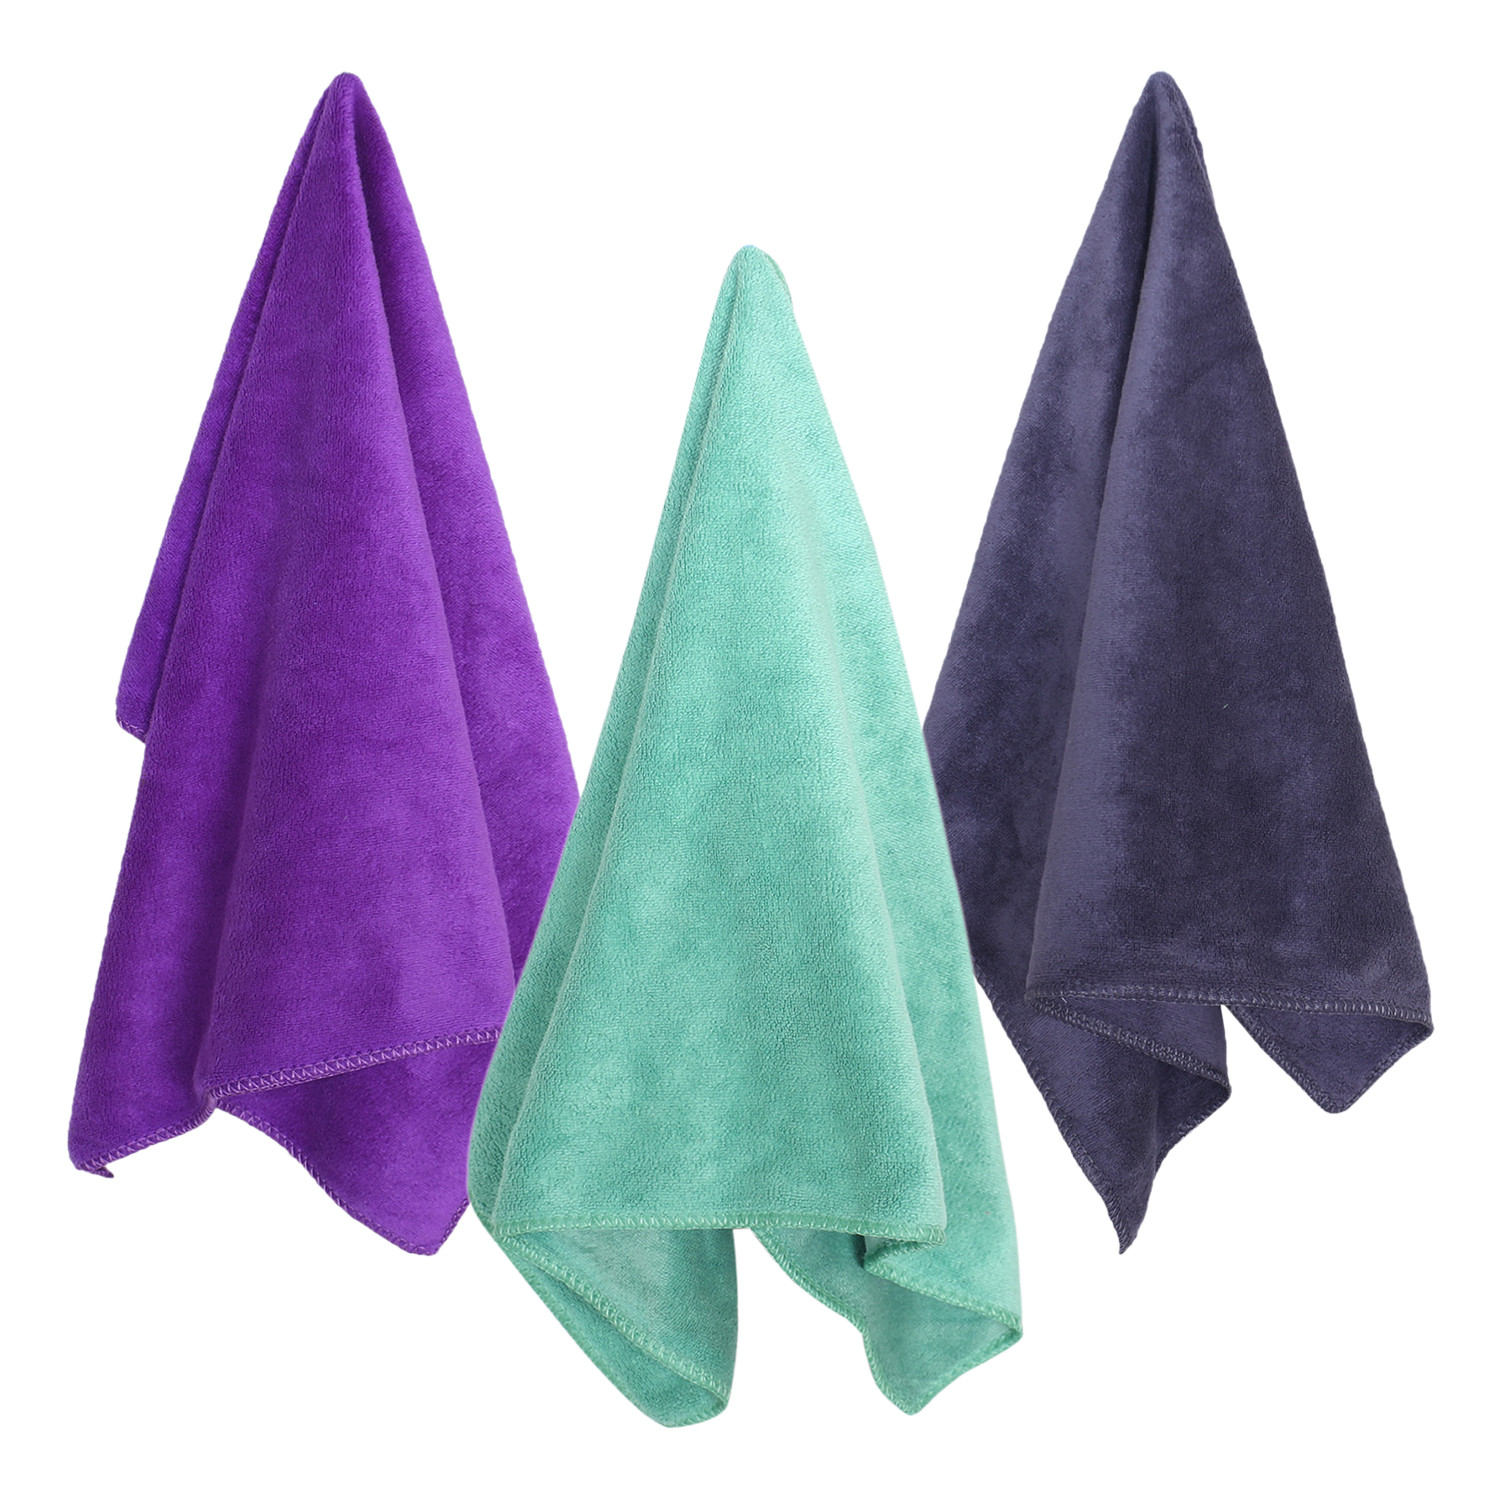 Kuber Industries Cleaning Cloths|Microfiber Highly Absorbent Wash Towels for Kitchen,Car,Window,24 x 16 Inch,Pack of 3 (Green,Purple & Gray)